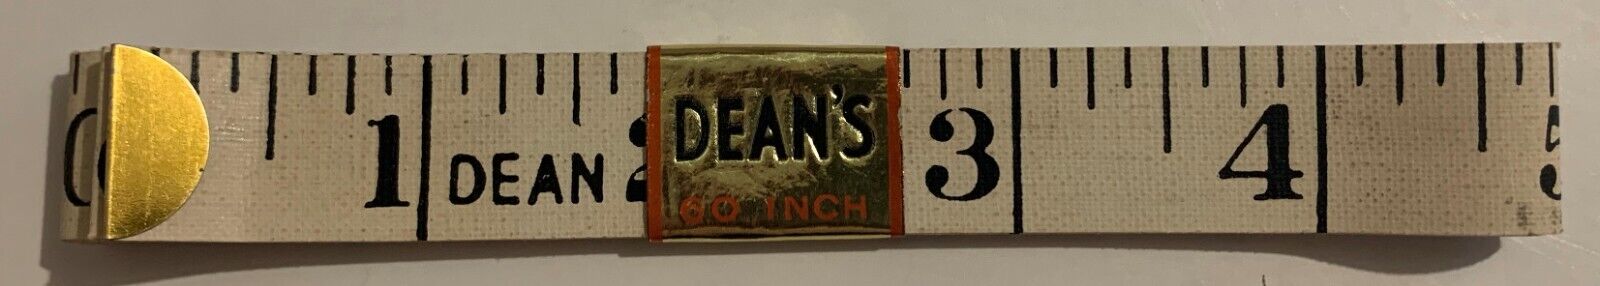 Vintage Dean\'s 60 Inch England Fabric Cloth Sewing Measuring Tape Wrapper NOS